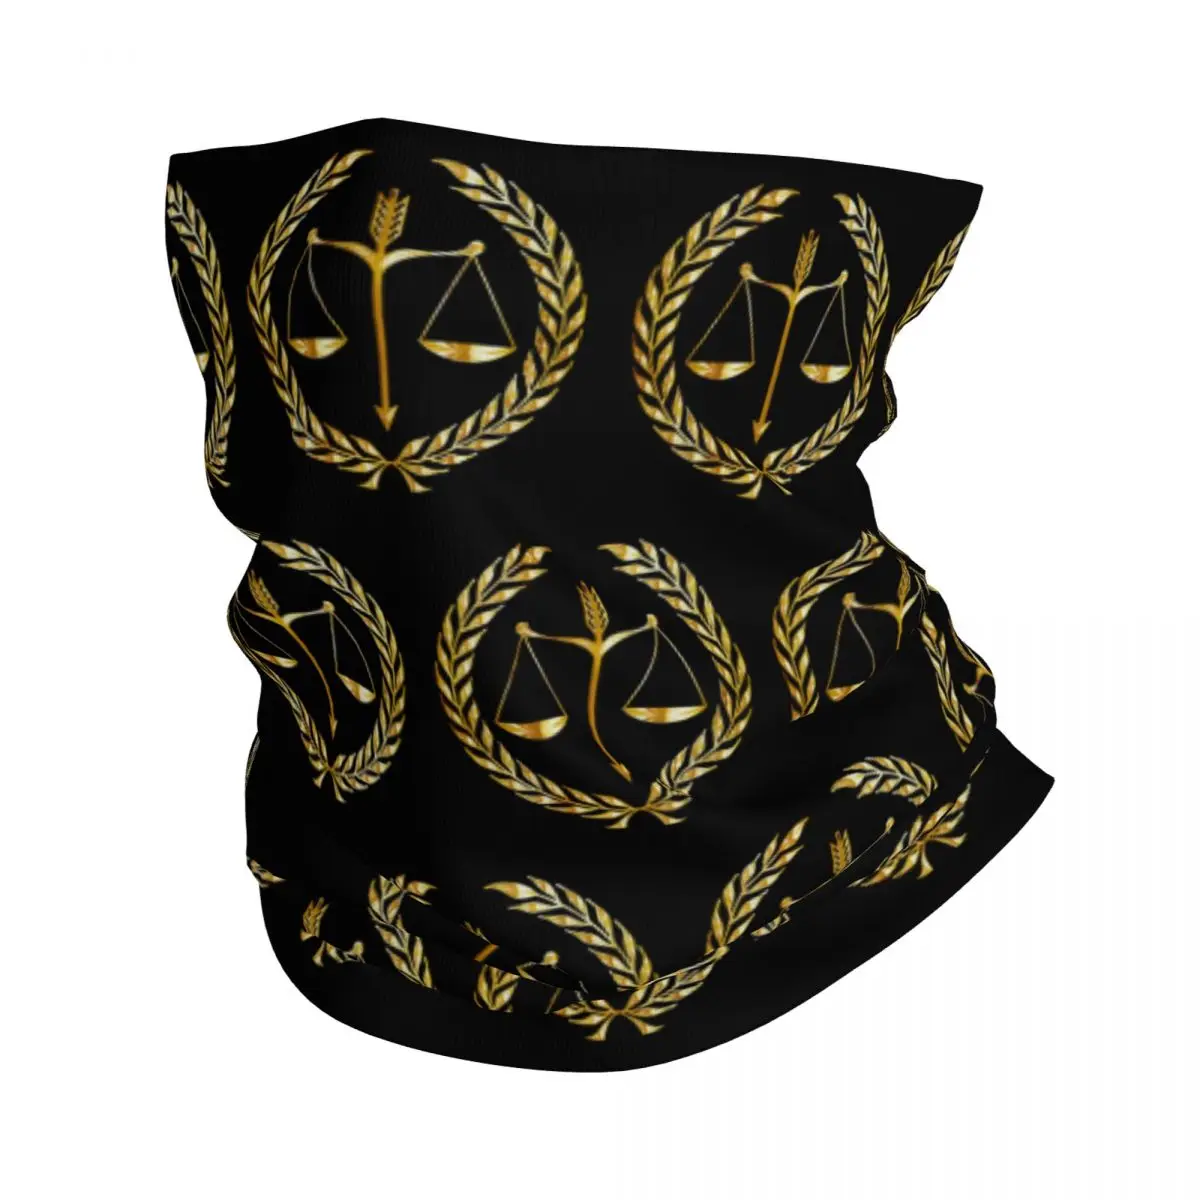 

Law Golden Scales Of Justice Bandana Neck Gaiter for Hiking Camping Women Men Wrap Scarf Lawyer Legal Party Gift Headband Warmer